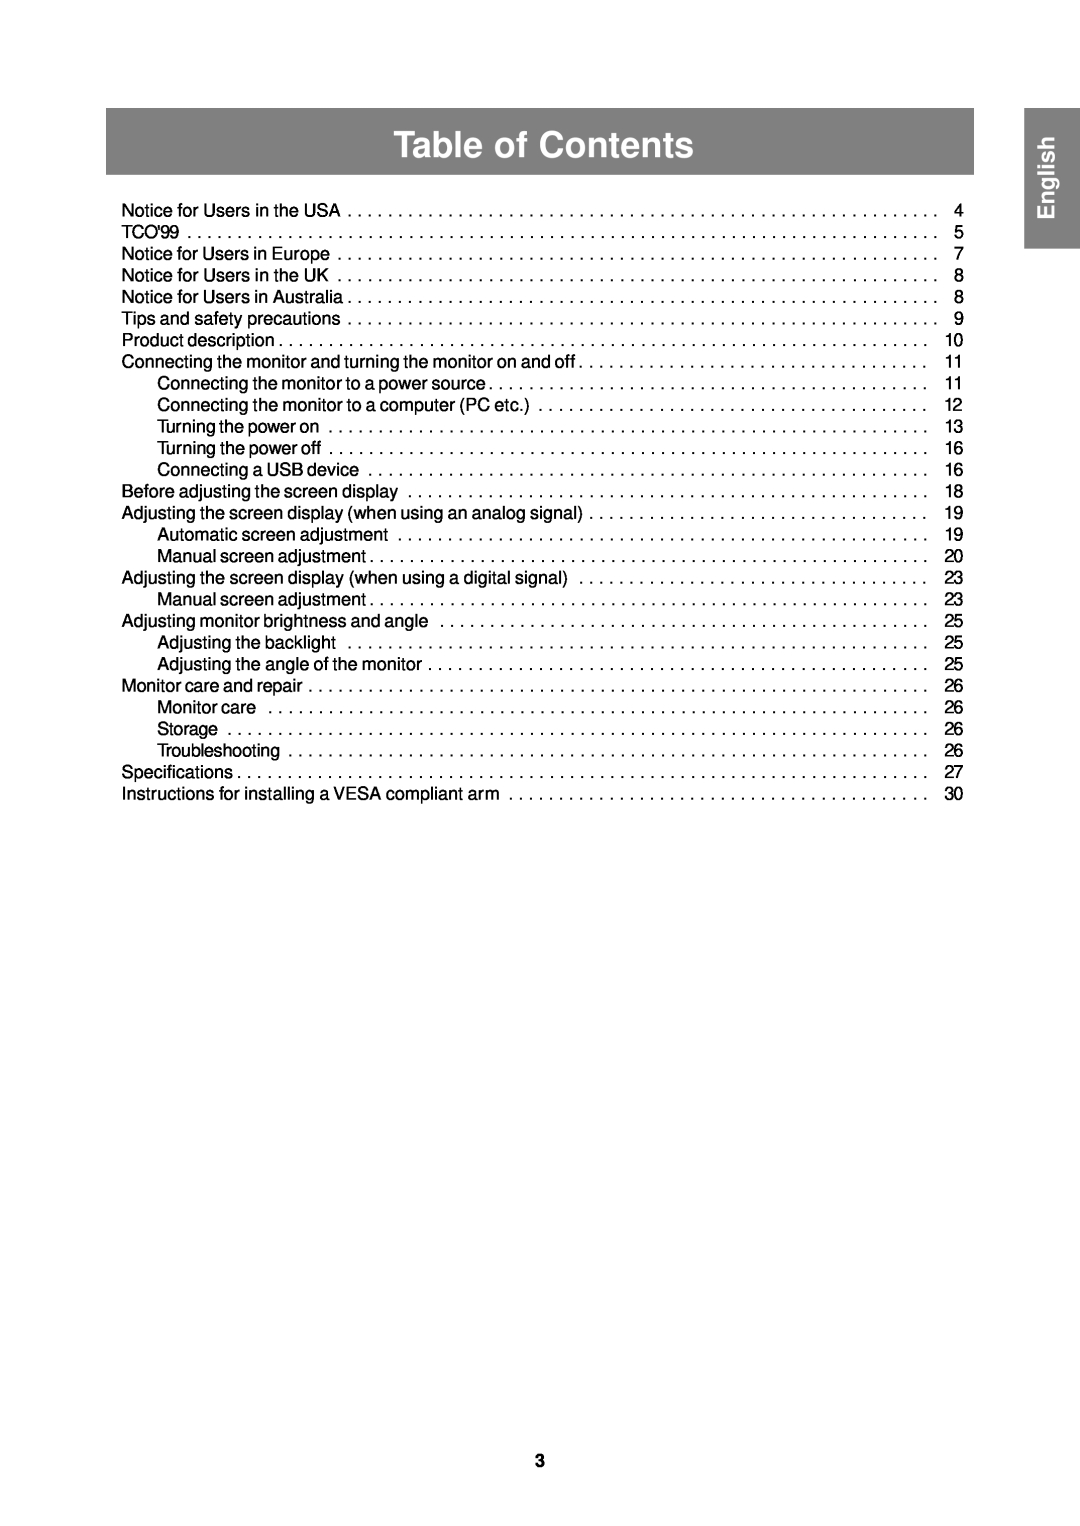 Sharp LL-T1610W operation manual Table of Contents, English 